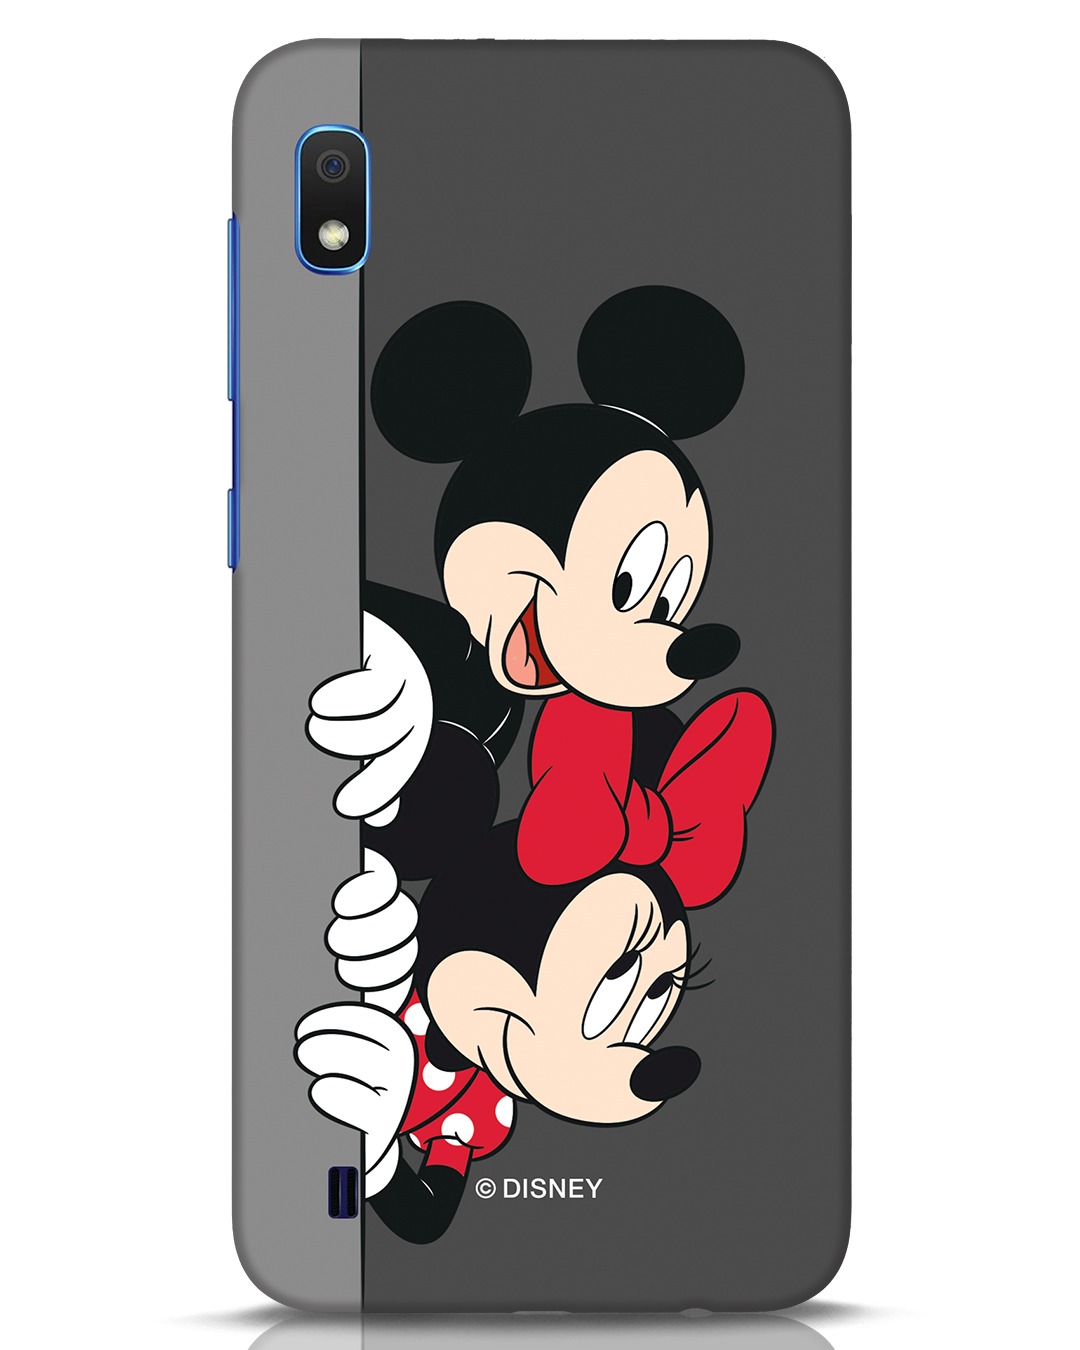 Buy Mickey And Minnie Samsung Galaxy A10 Mobile Cover For Unisex Online At Bewakoof 5717